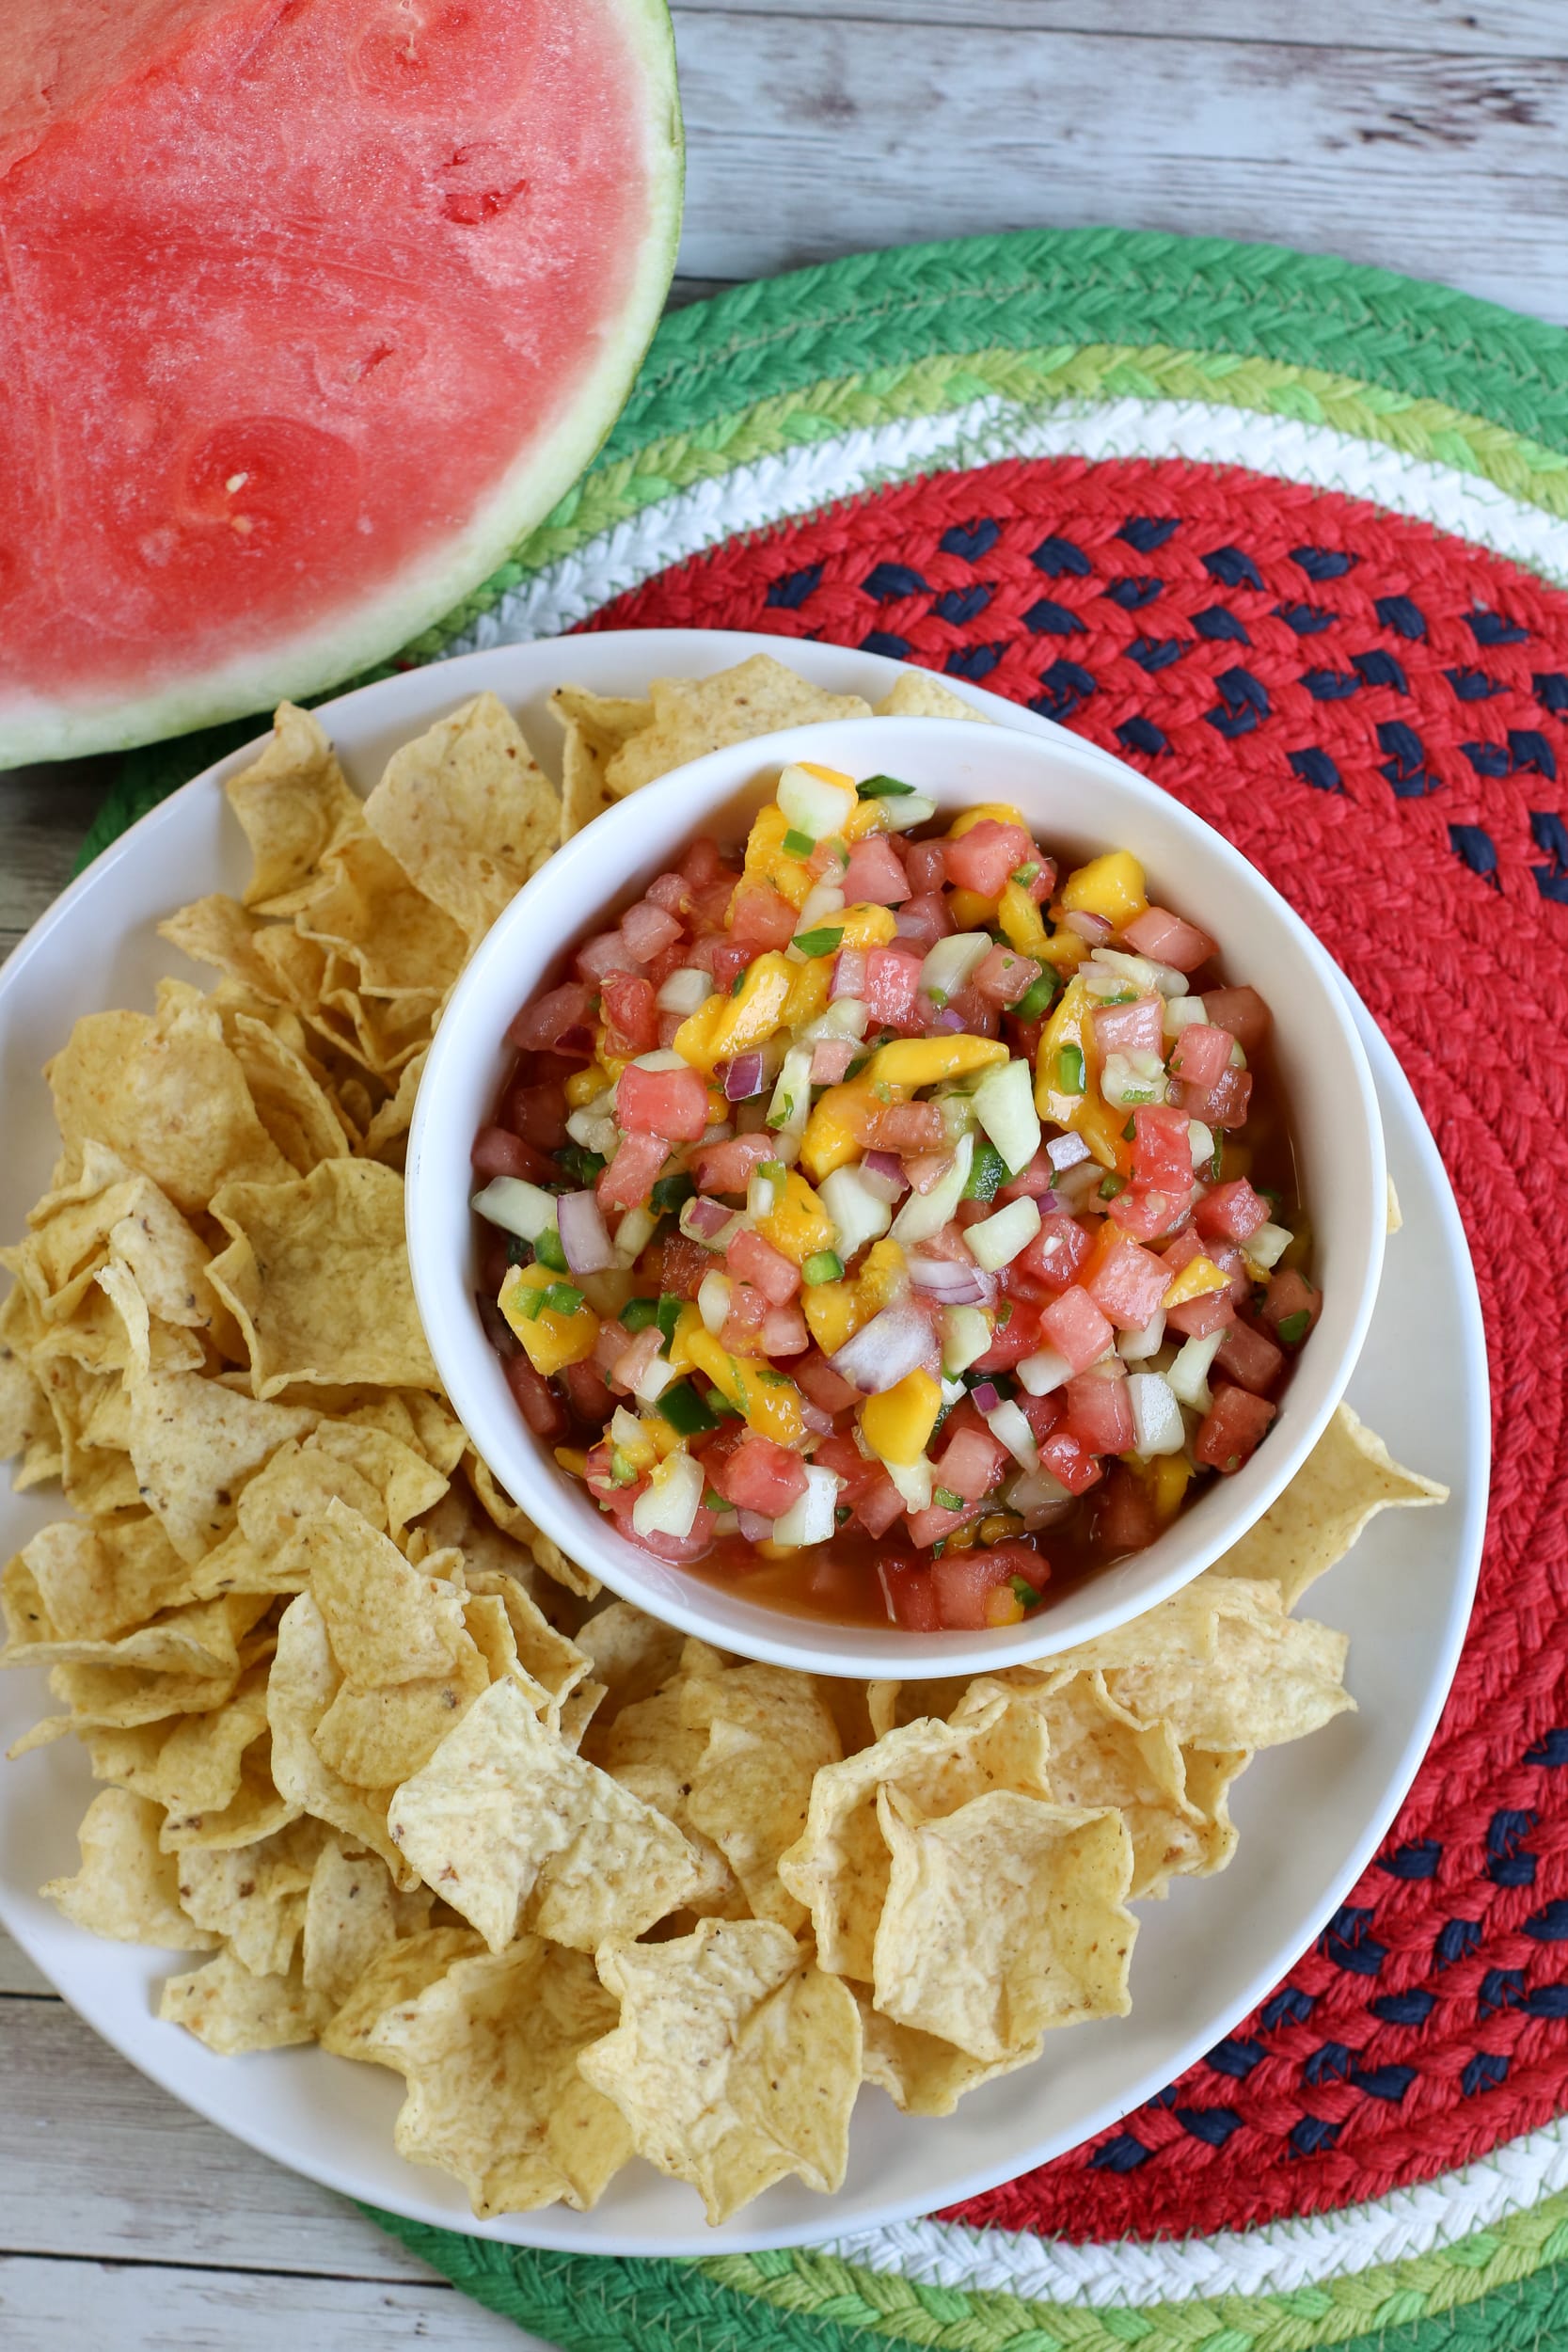 If you love watermelon, you are going to love this Homemade Watermelon Salsa recipe. It is sweet and spicy, tangy, and refreshing.